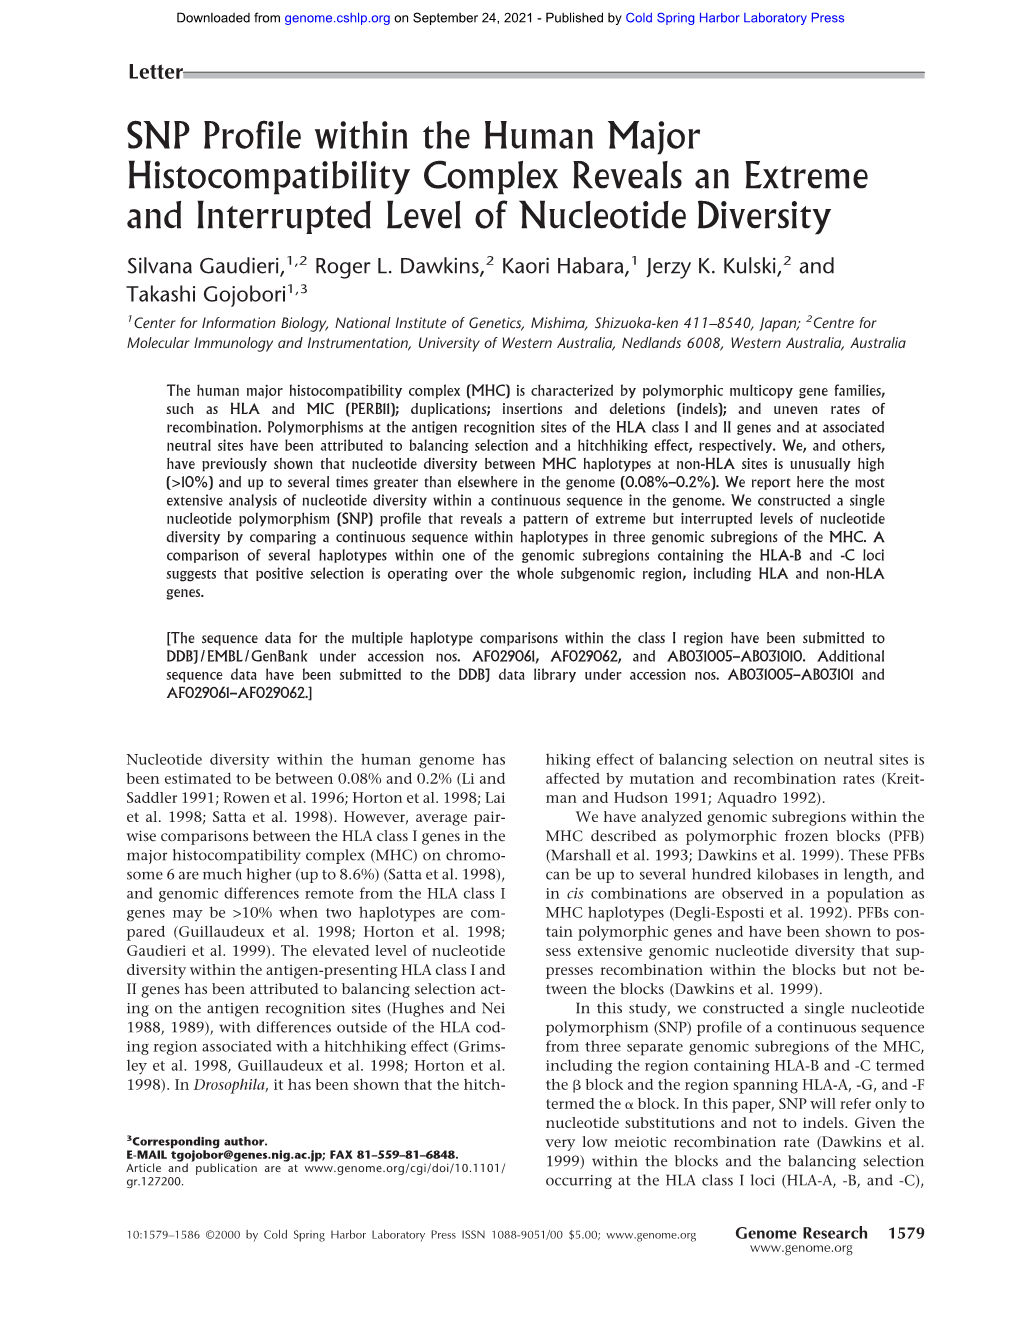 SNP Profile Within the Human Major Histocompatibility Complex Reveals an Extreme and Interrupted Level of Nucleotide Diversity